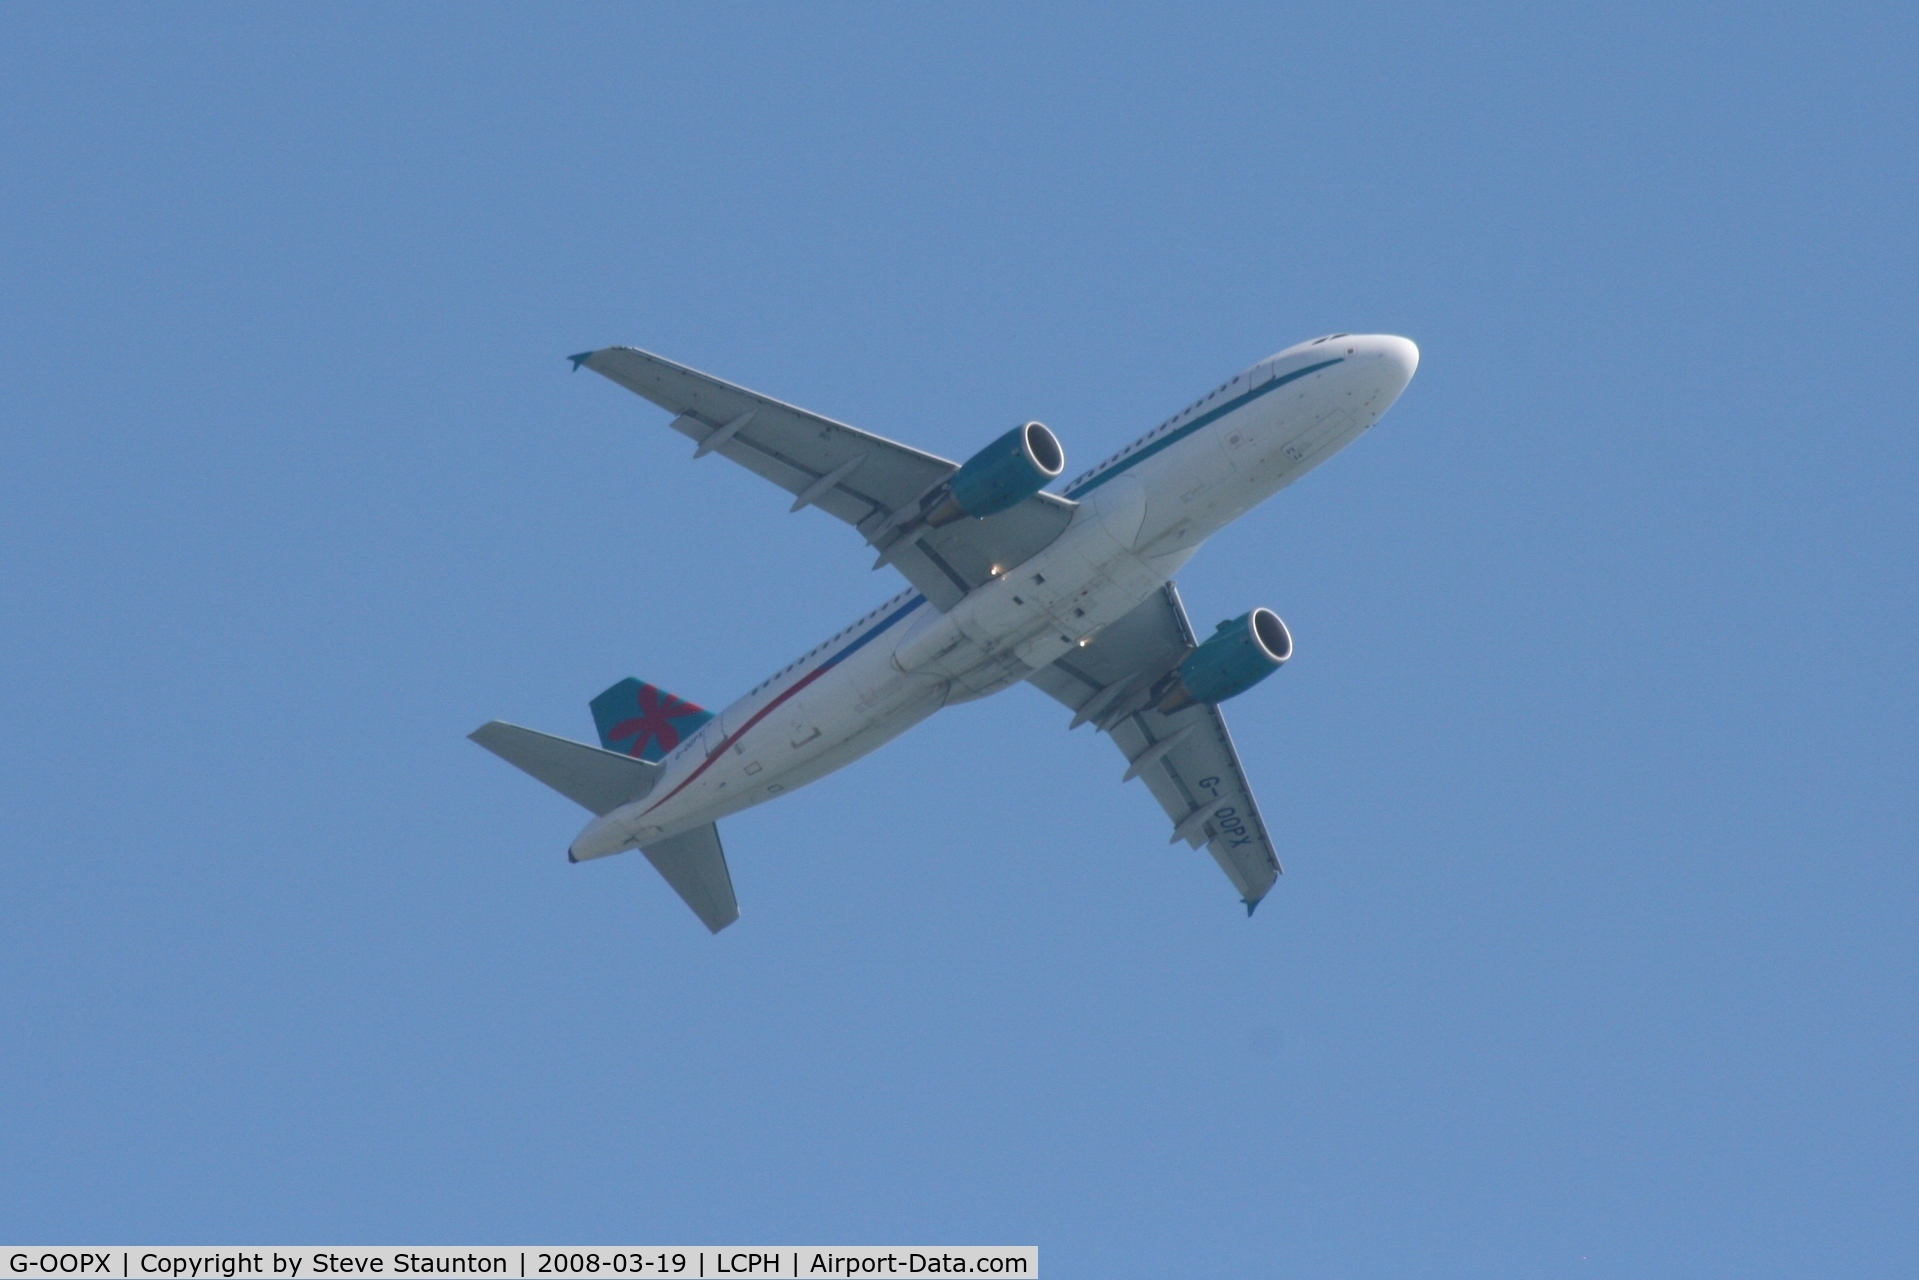 G-OOPX, 2004 Airbus A320-214 C/N 2180, Taken on the approach to Paphos Airport, Cyprus (Climbing out this way today)